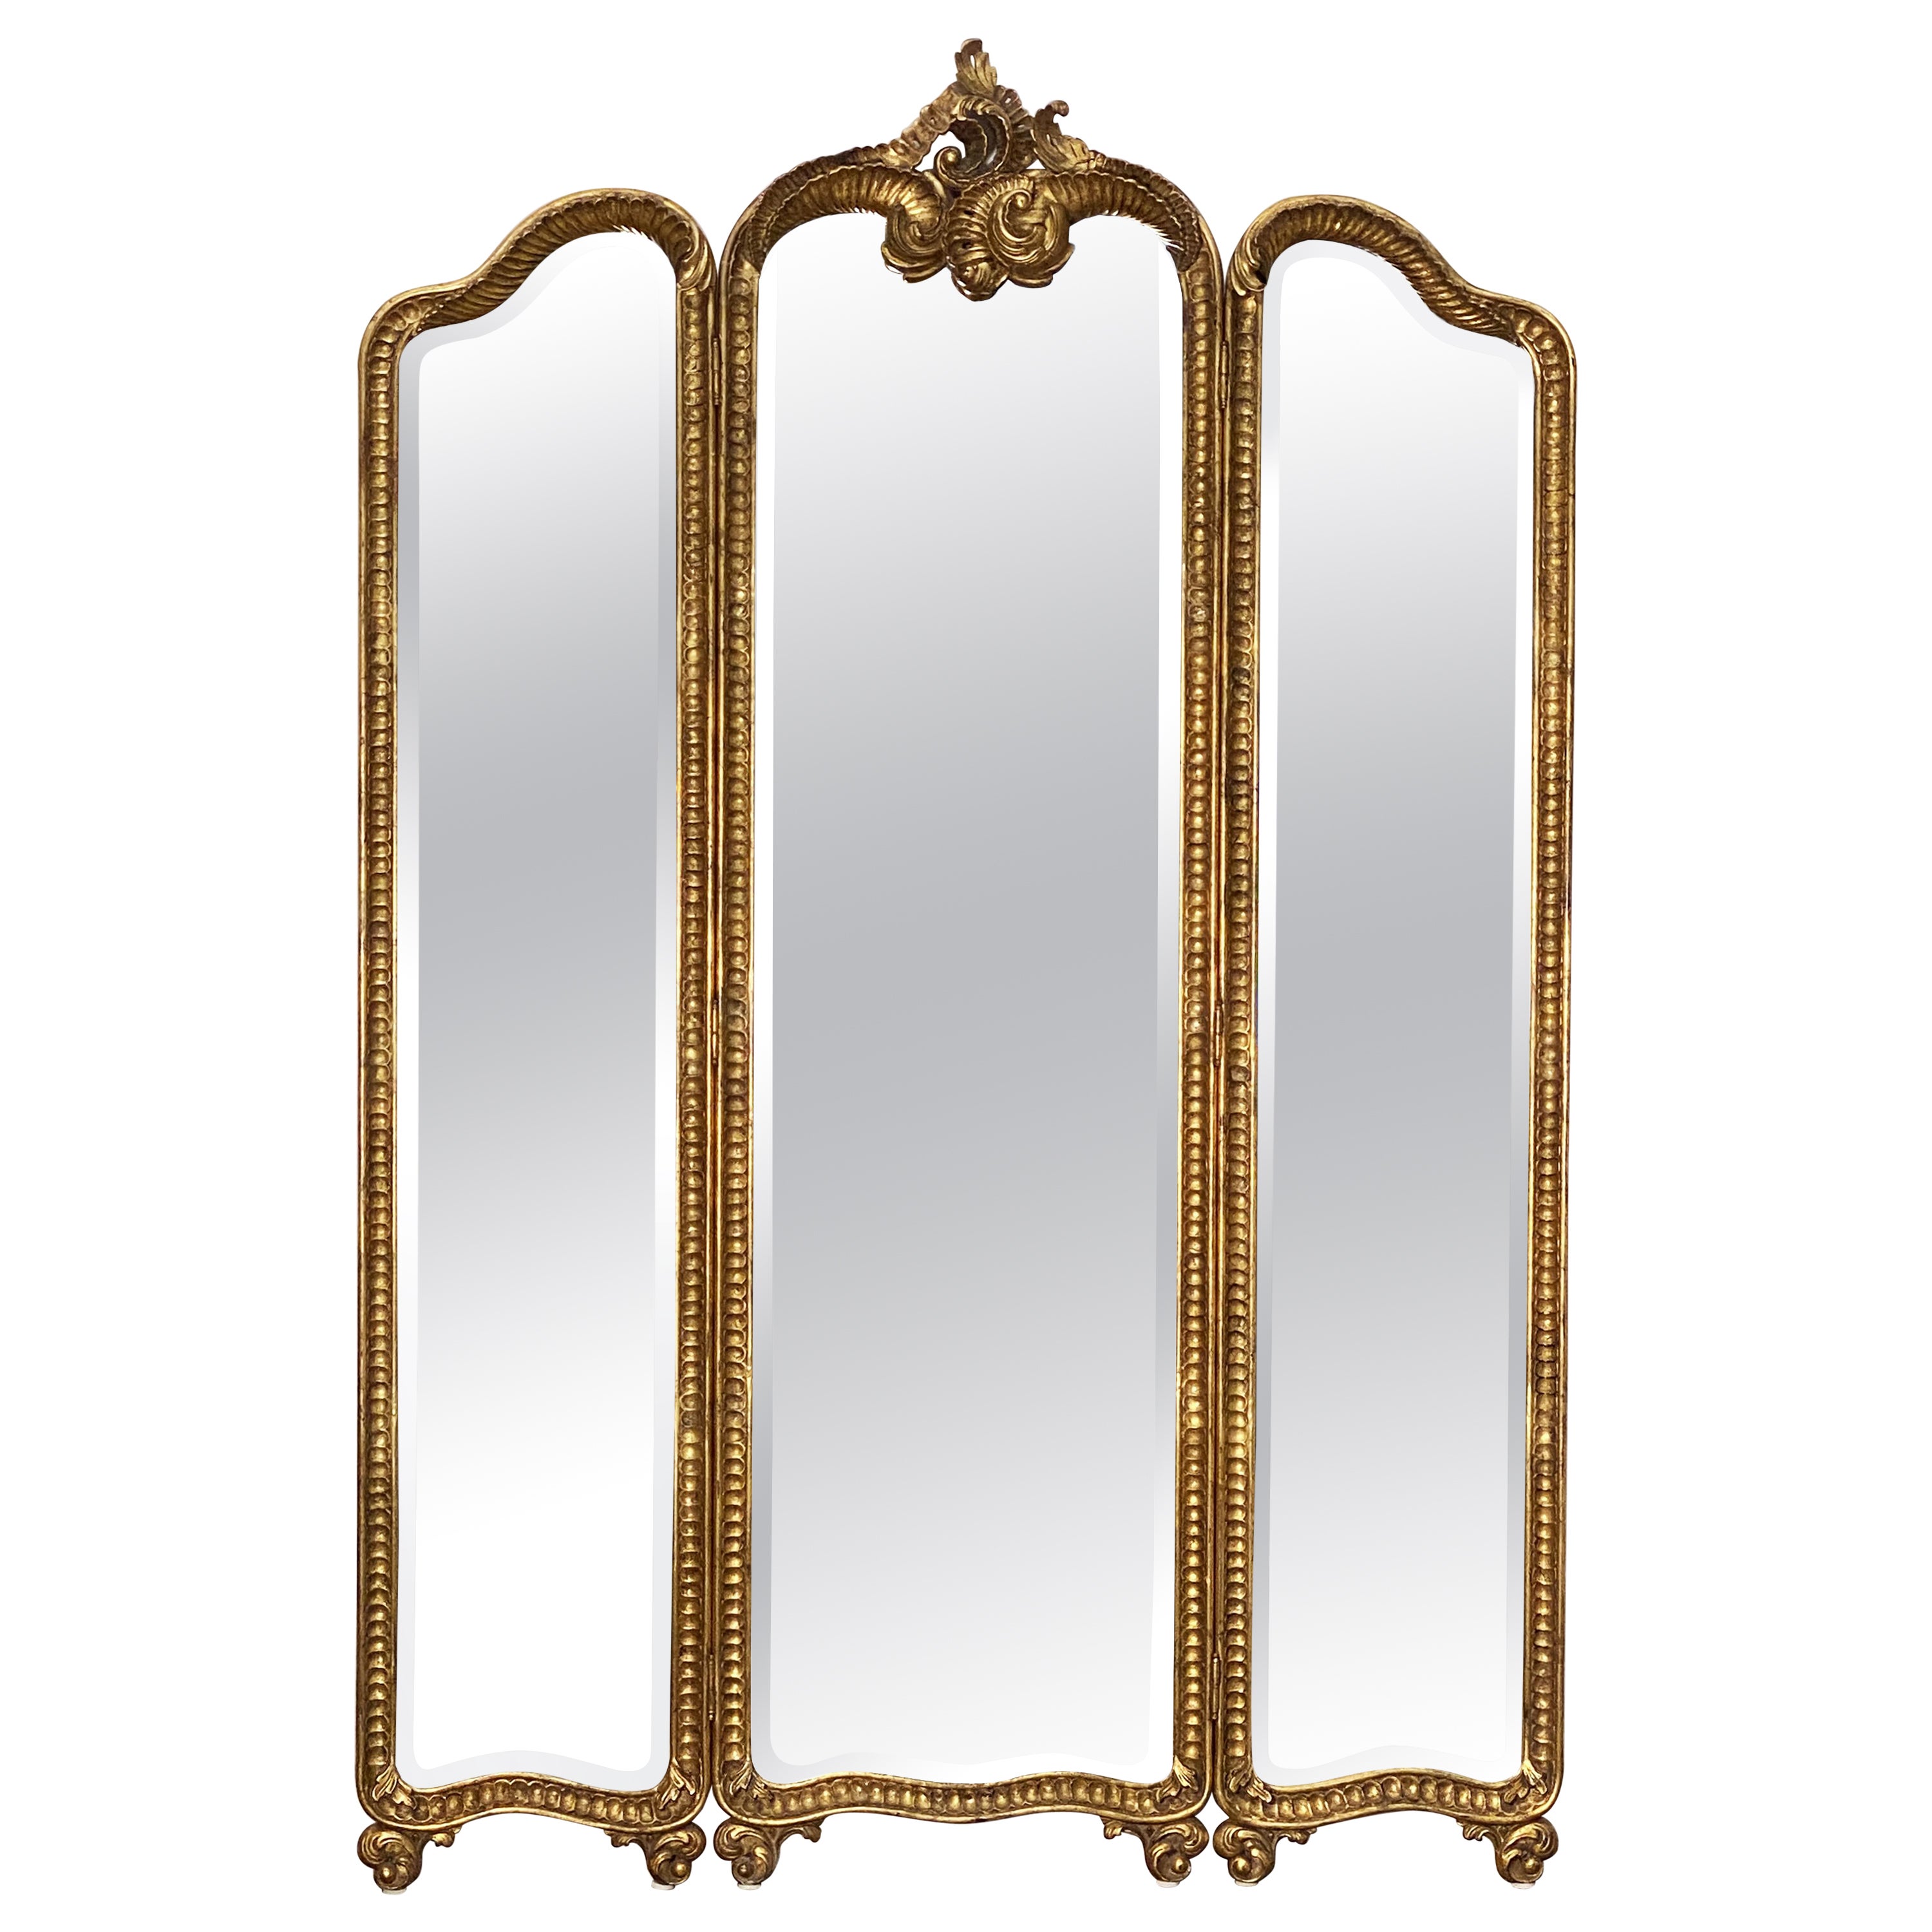 English Floor Standing Three Panel Dressing Mirror with Gilded Frame (H 82 1/4)